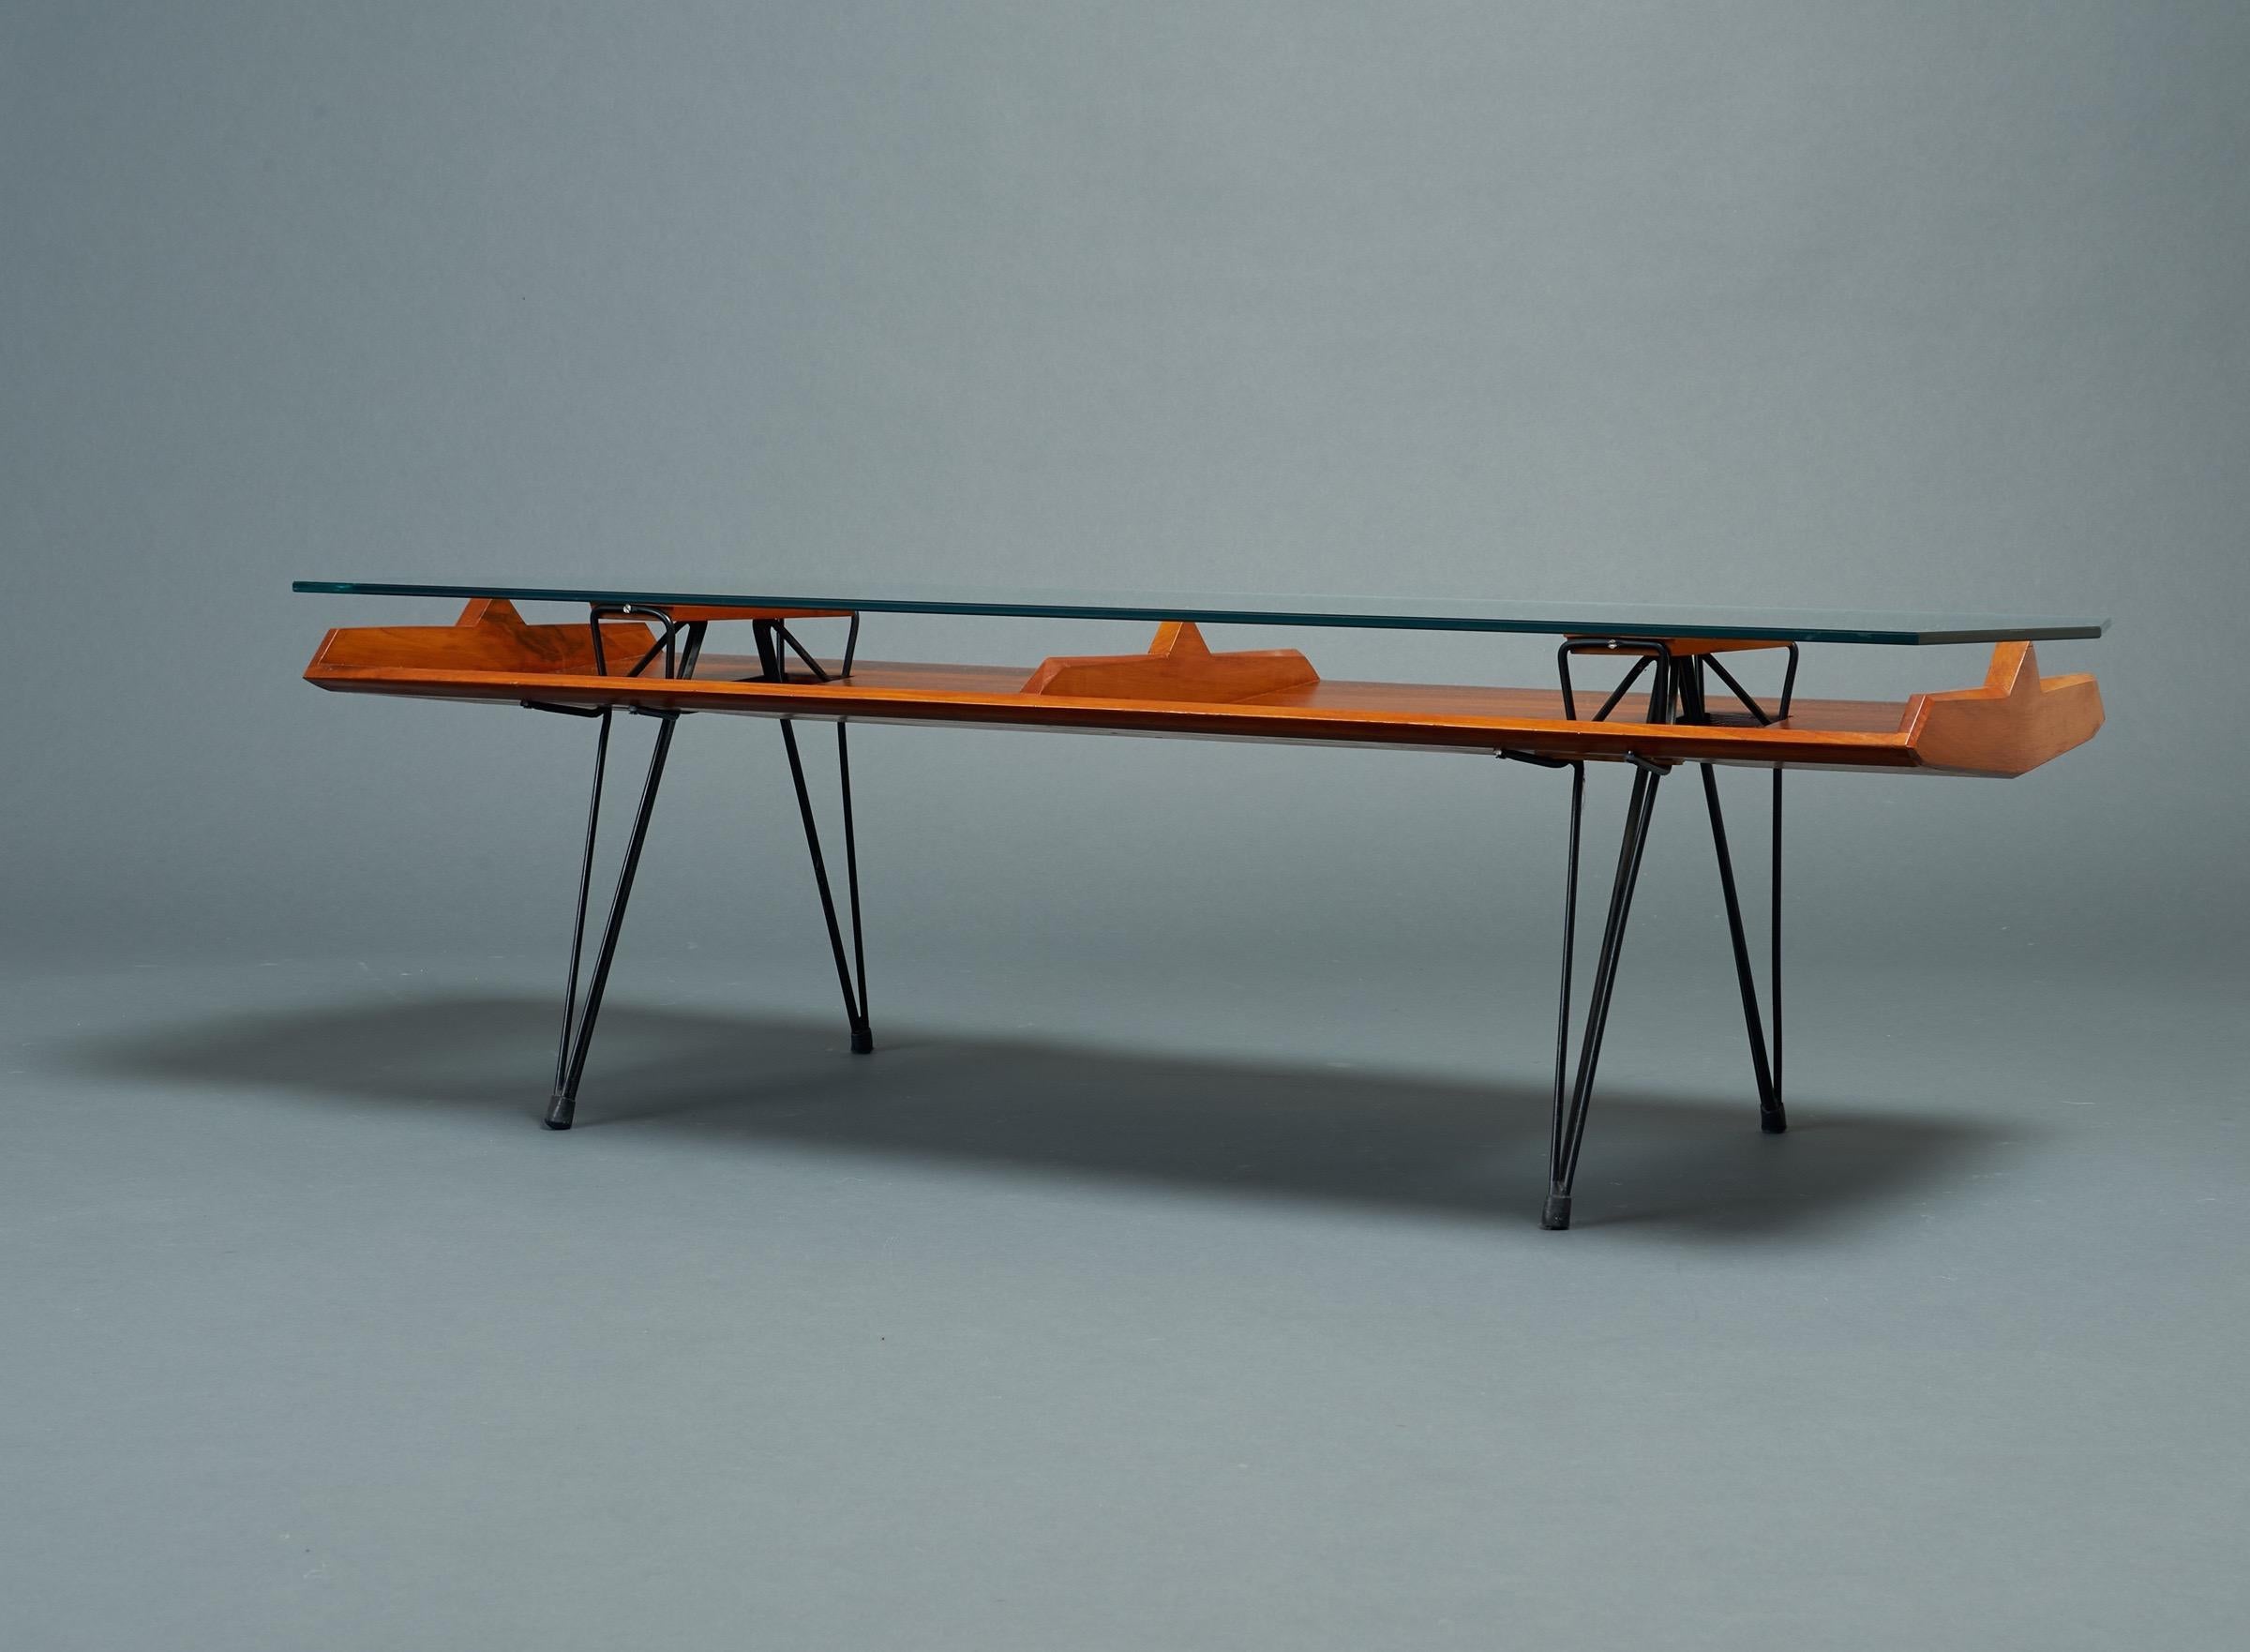 Opere e i Giorni Modernist Architectural Walnut & Glass Coffee Table, Italy 2010 In Excellent Condition For Sale In New York, NY